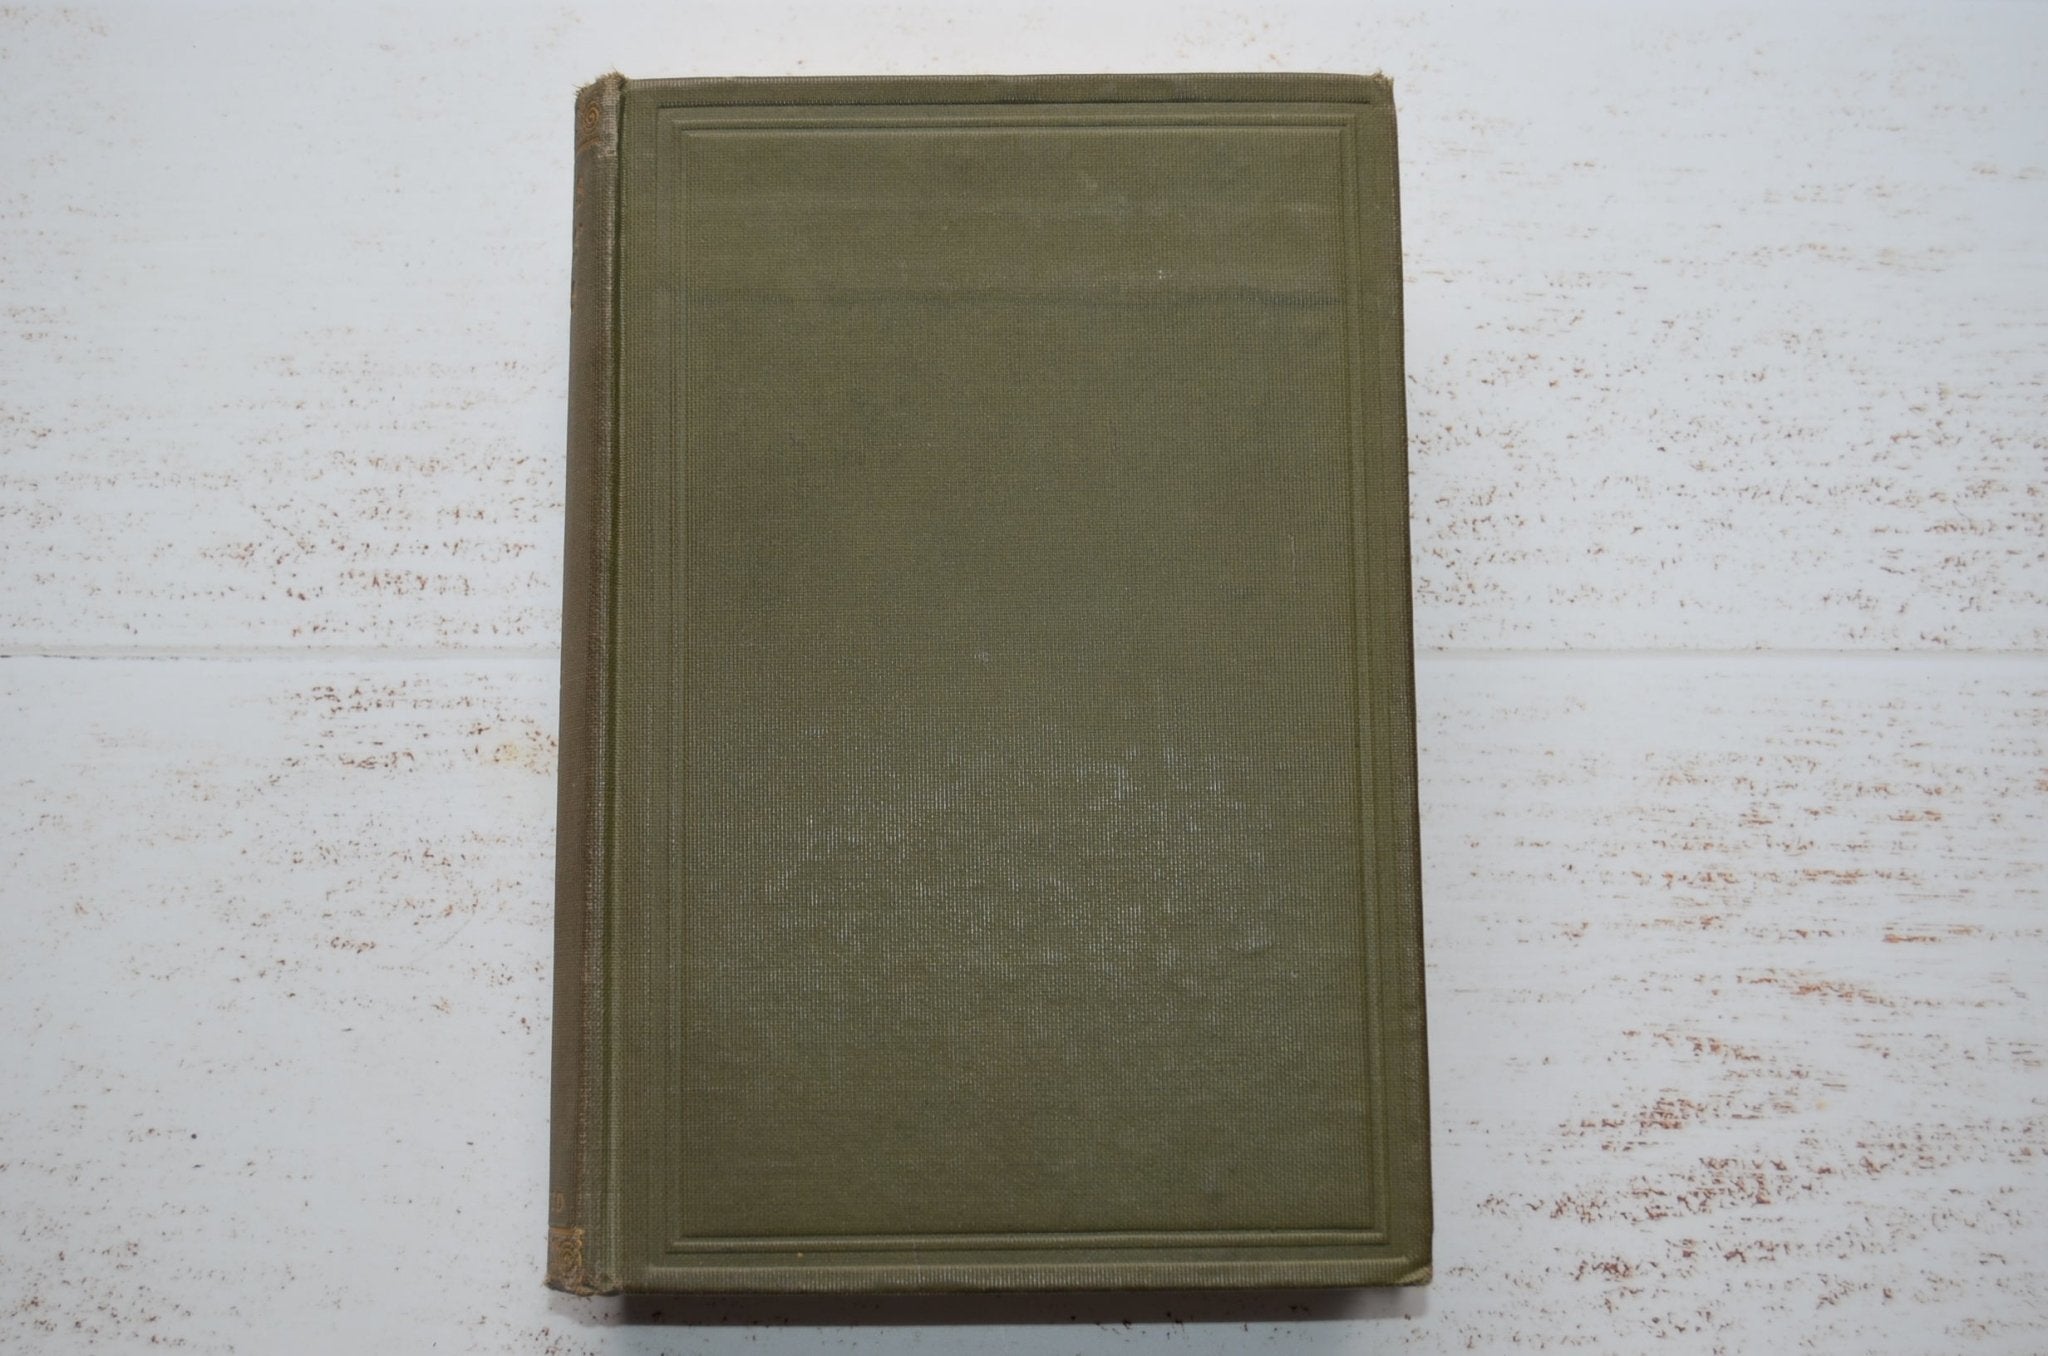 Antique Cloth Bound Book Décor – 1.5 Feet Olive Green & Gold – Charles Dickens’ Works - Brookfield Books